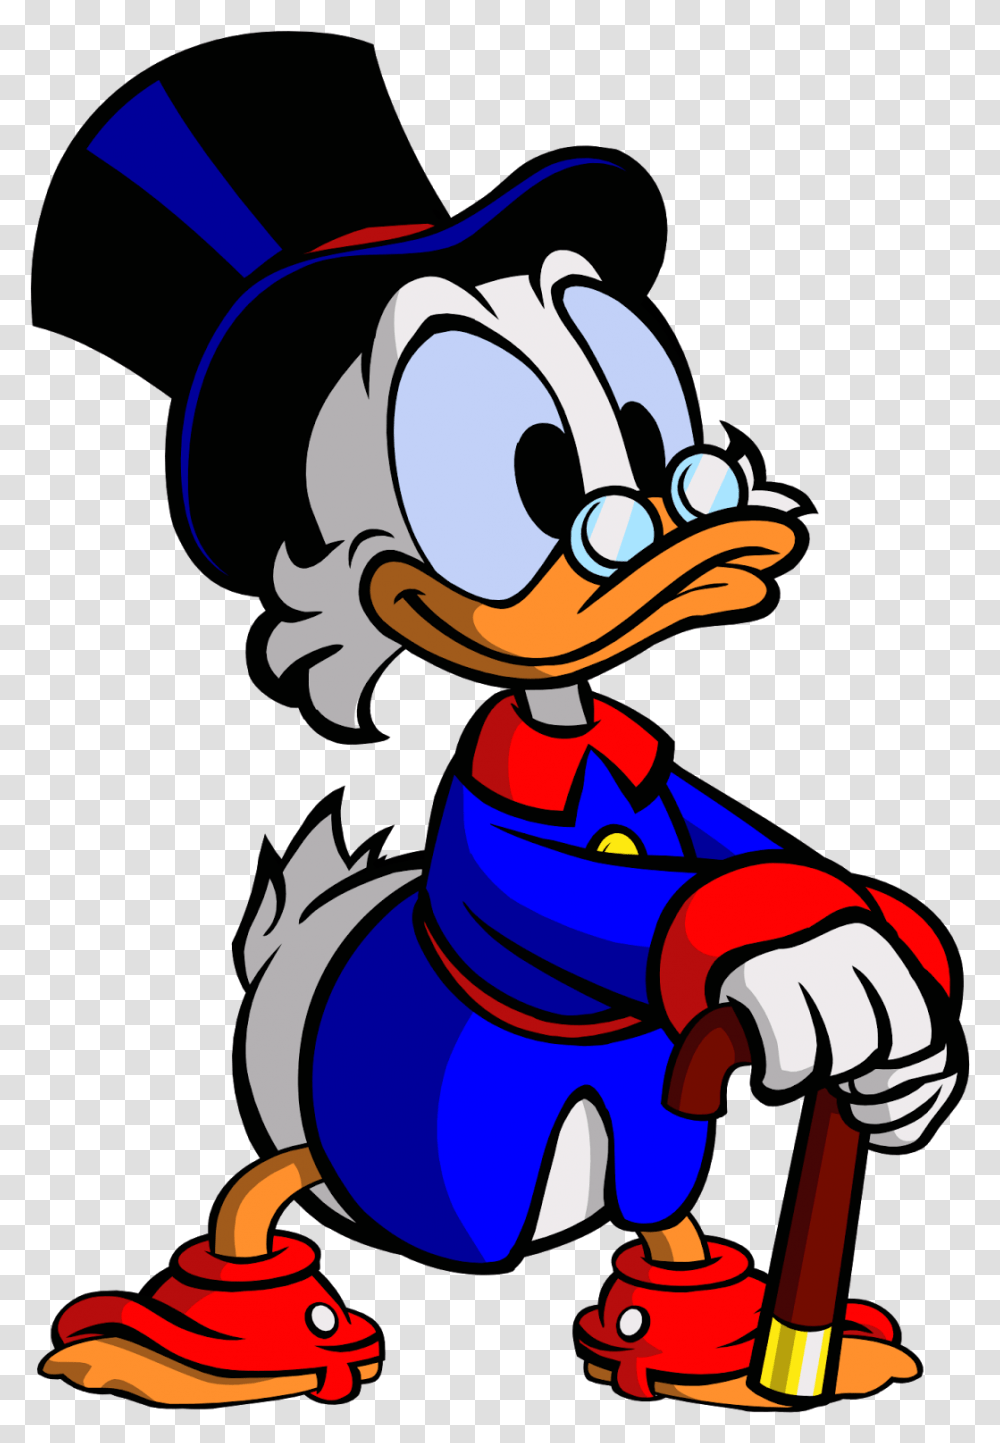 Scrooge Mcduck Duck Tales, Super Mario, Poster Transparent Png